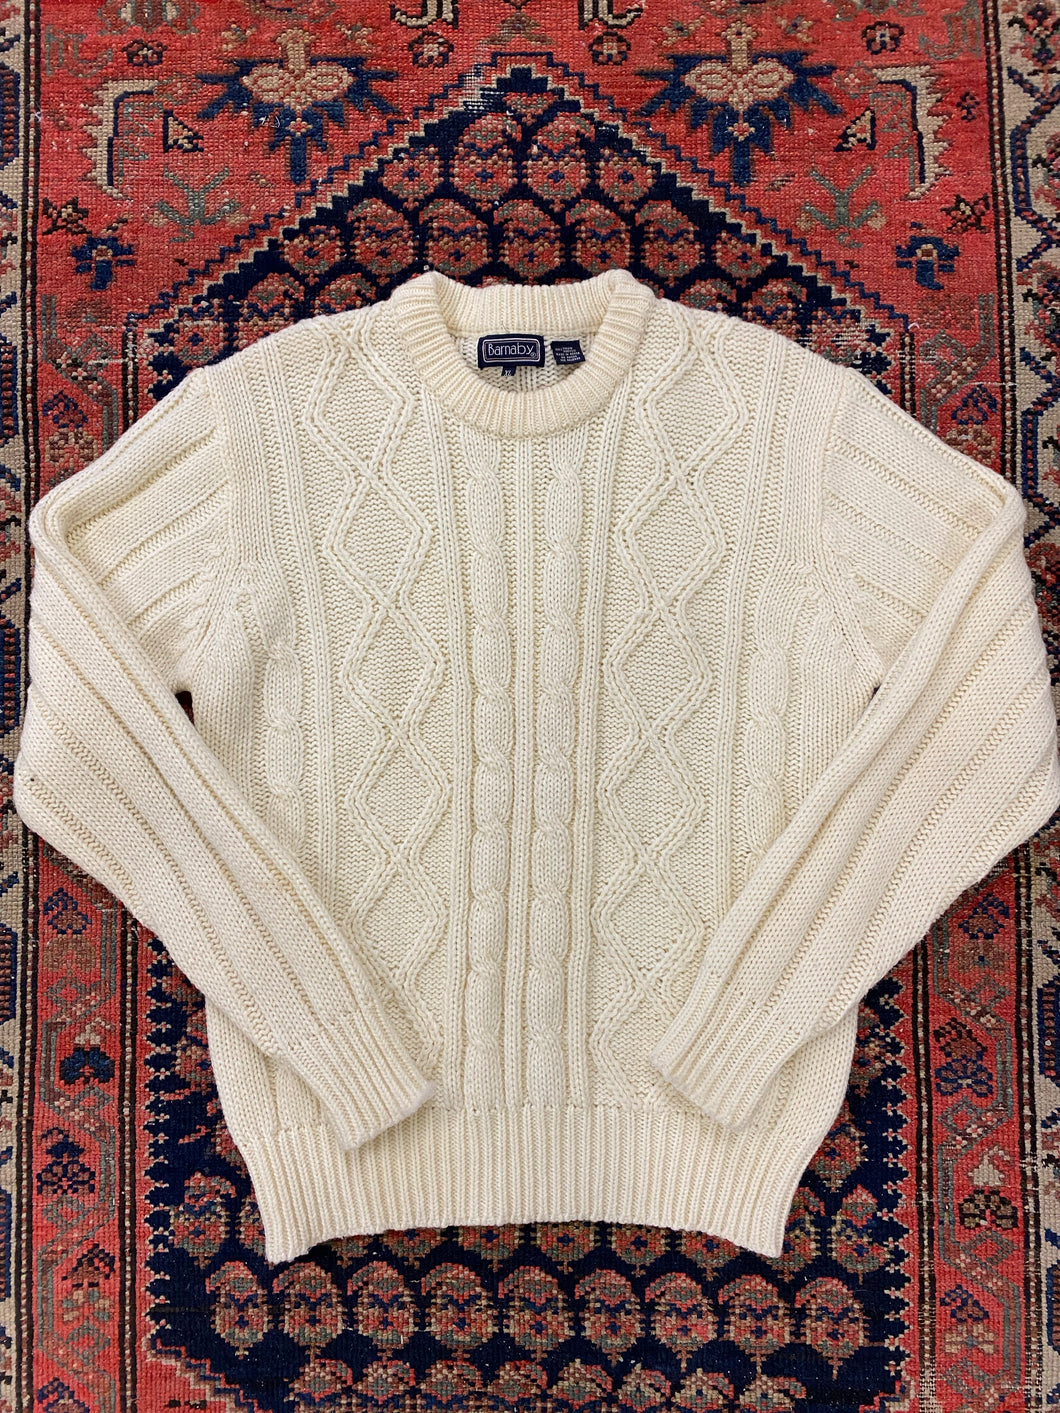 Vintage Cable Knit Sweater - S